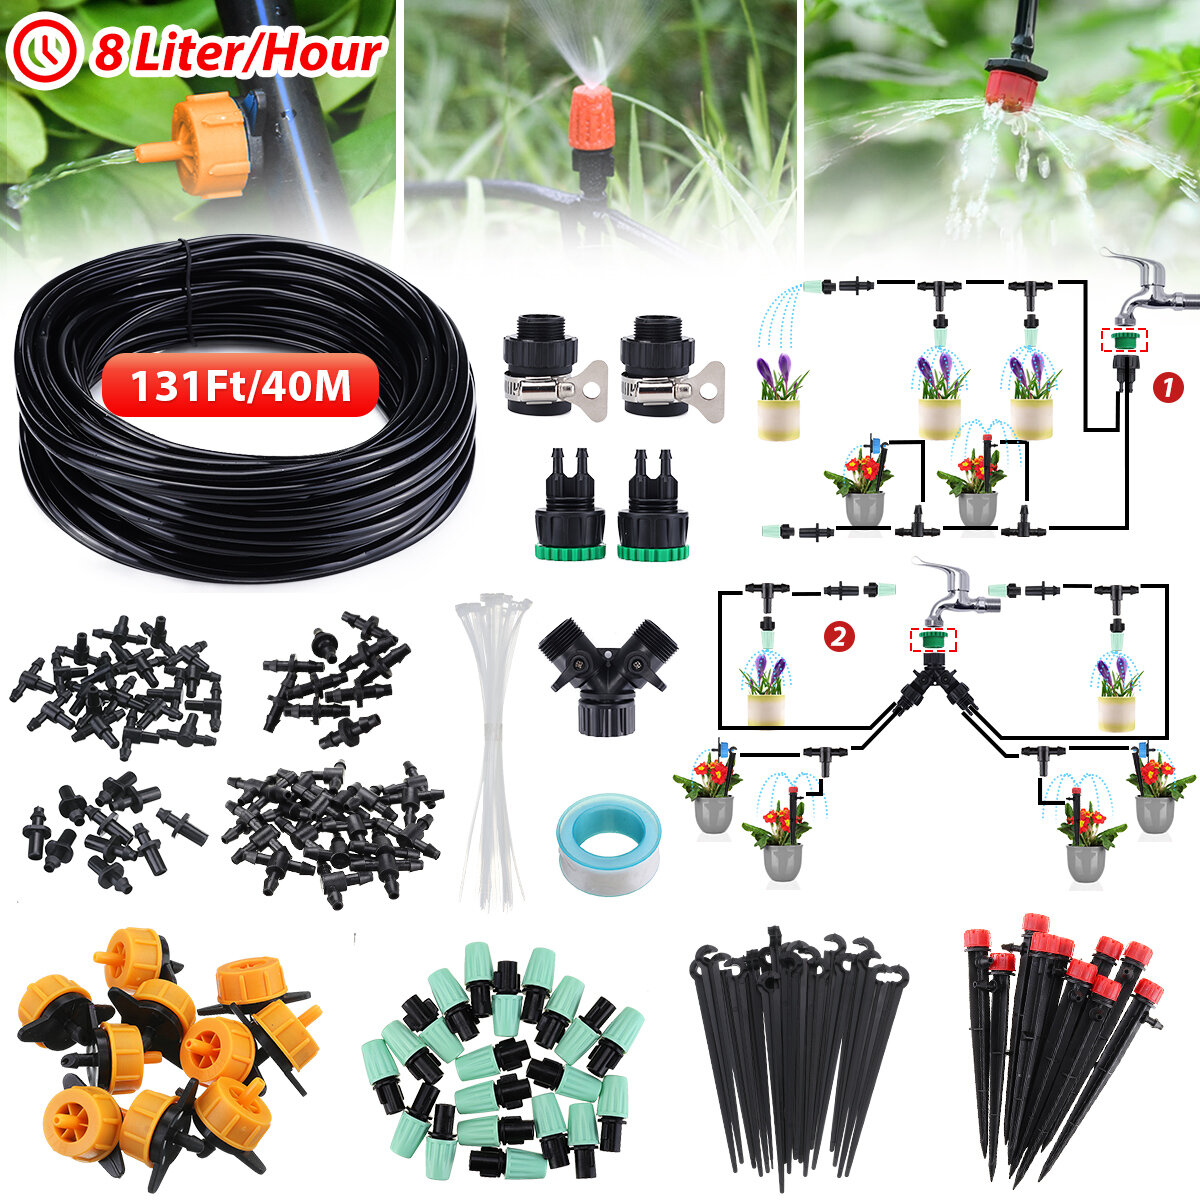 CAVEEN 131Ft/40M Automatic Drip Irrigation DIY Garden Plant Watering Kit Micro Drip Irrigation System Hose Kits